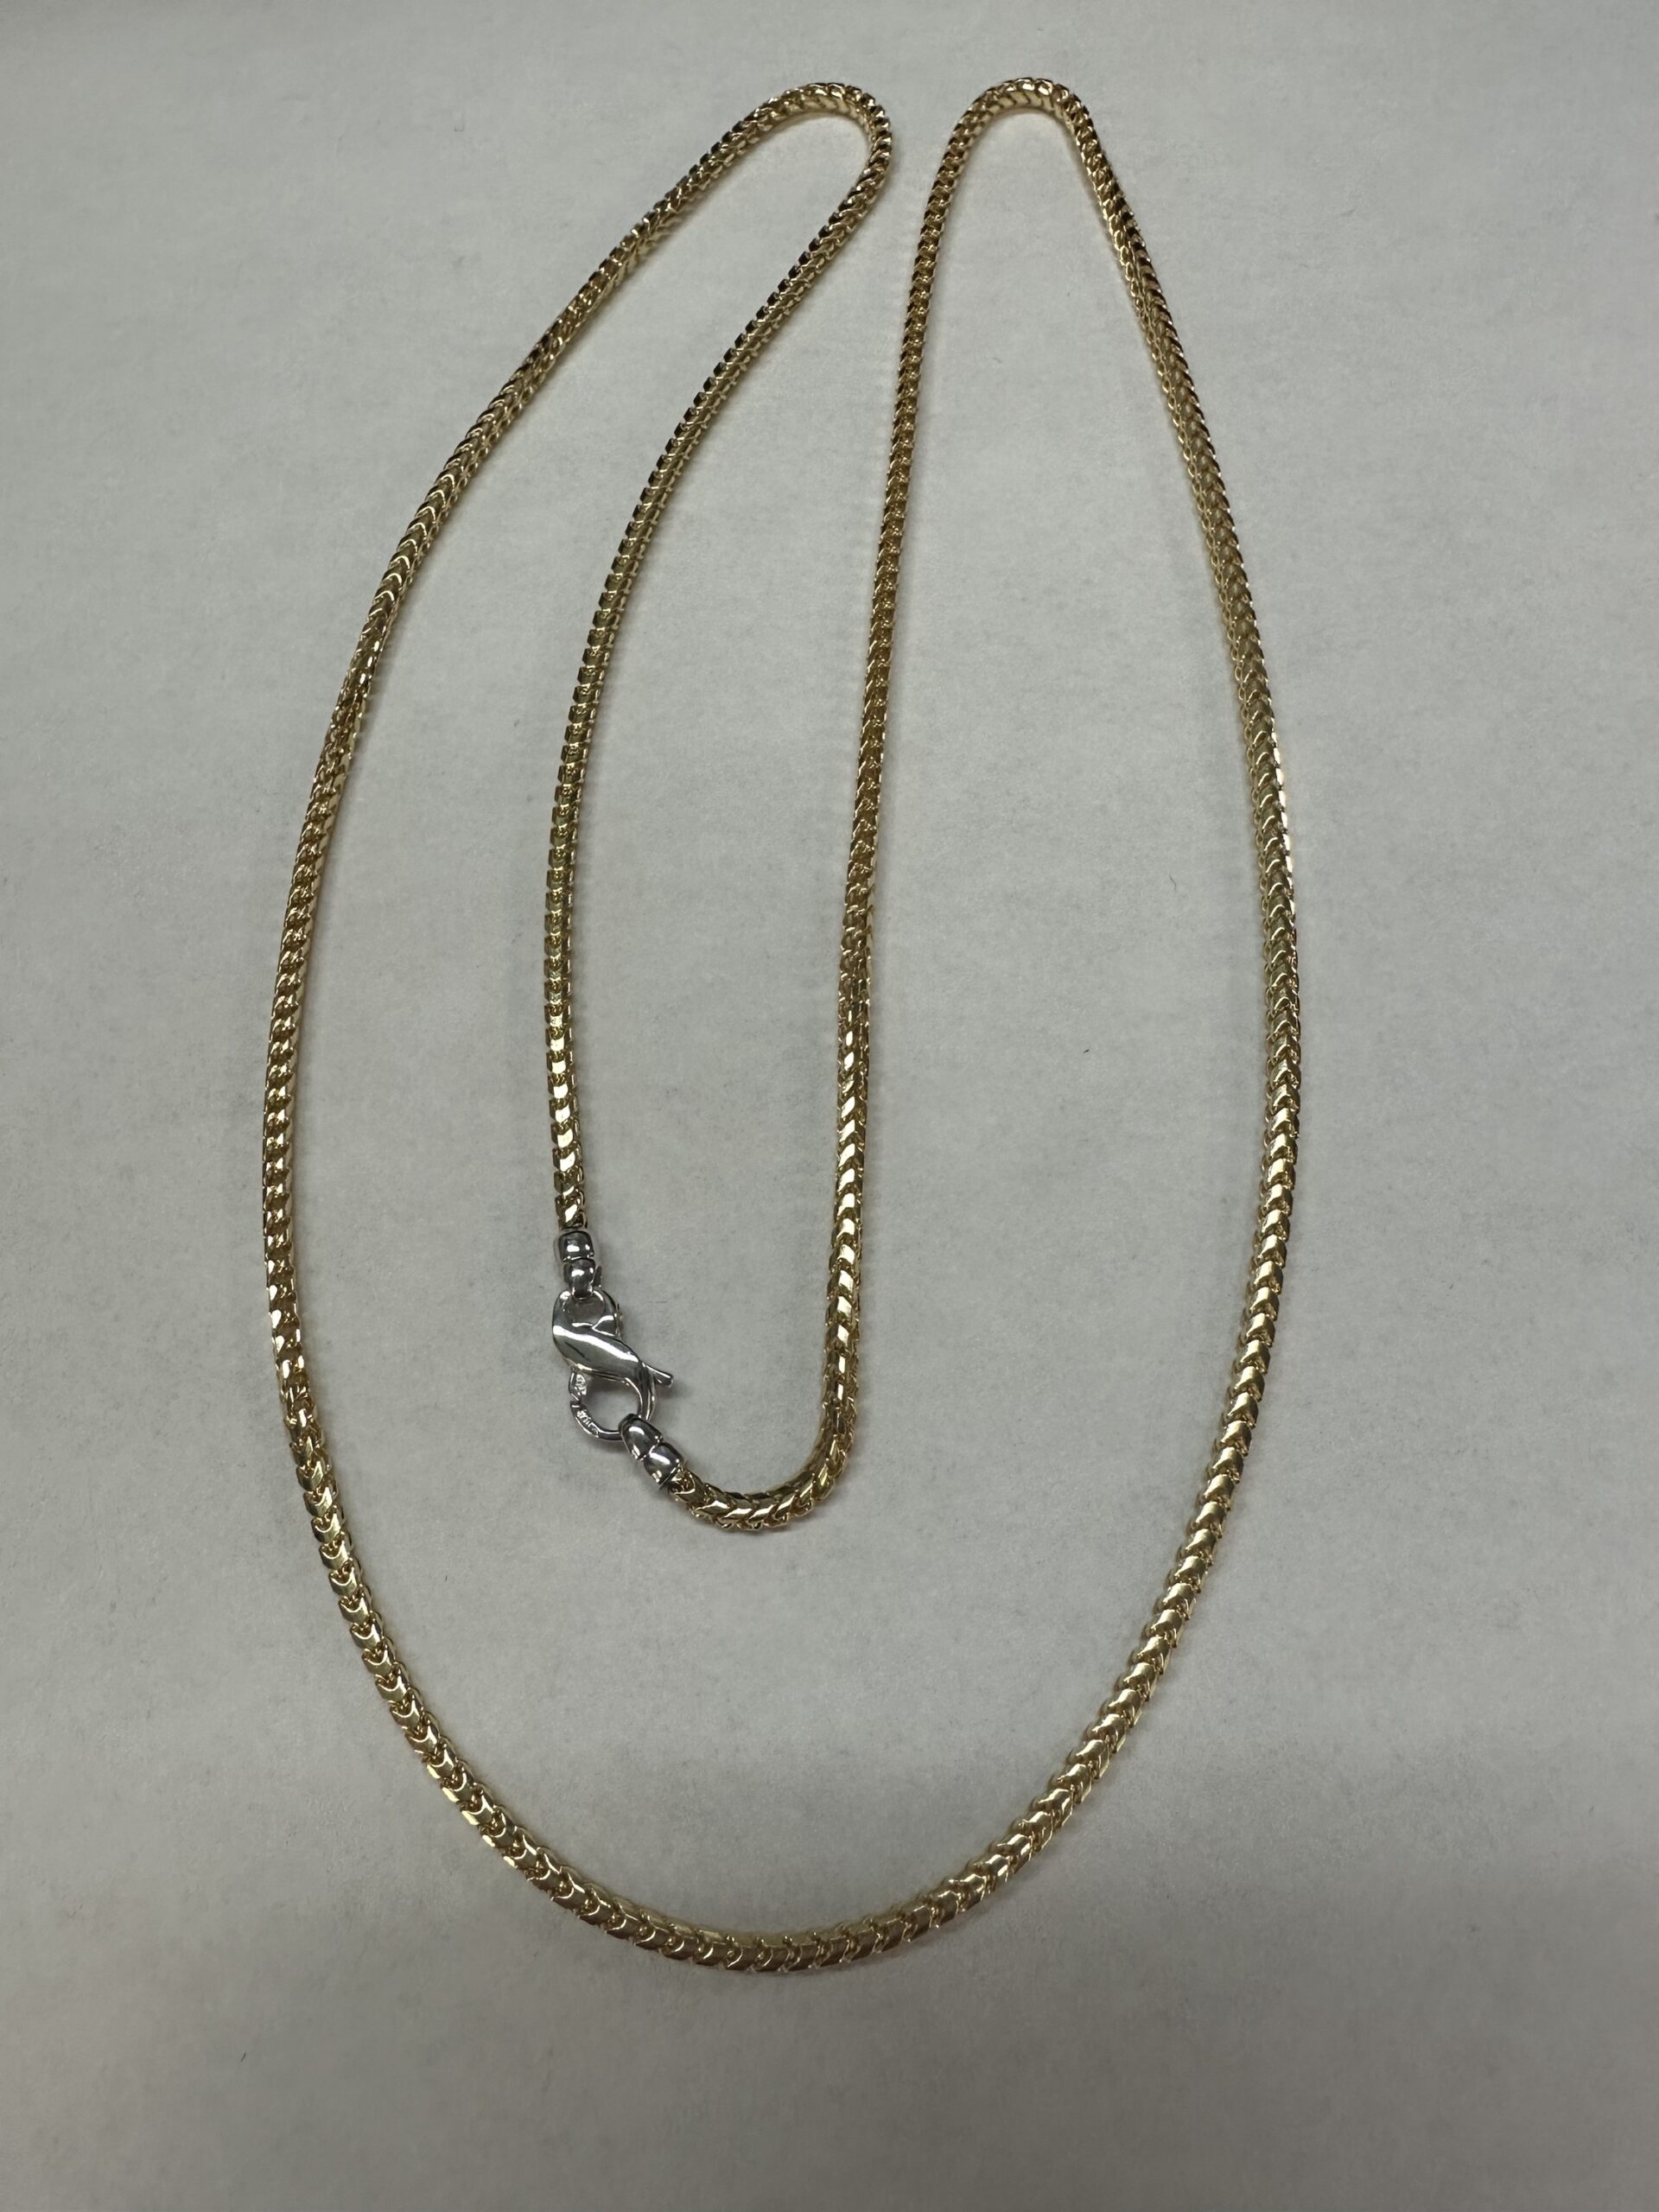 Amazon.com: 14K Yellow Gold Hollow 3.5mm Round Box Chain Necklace 20